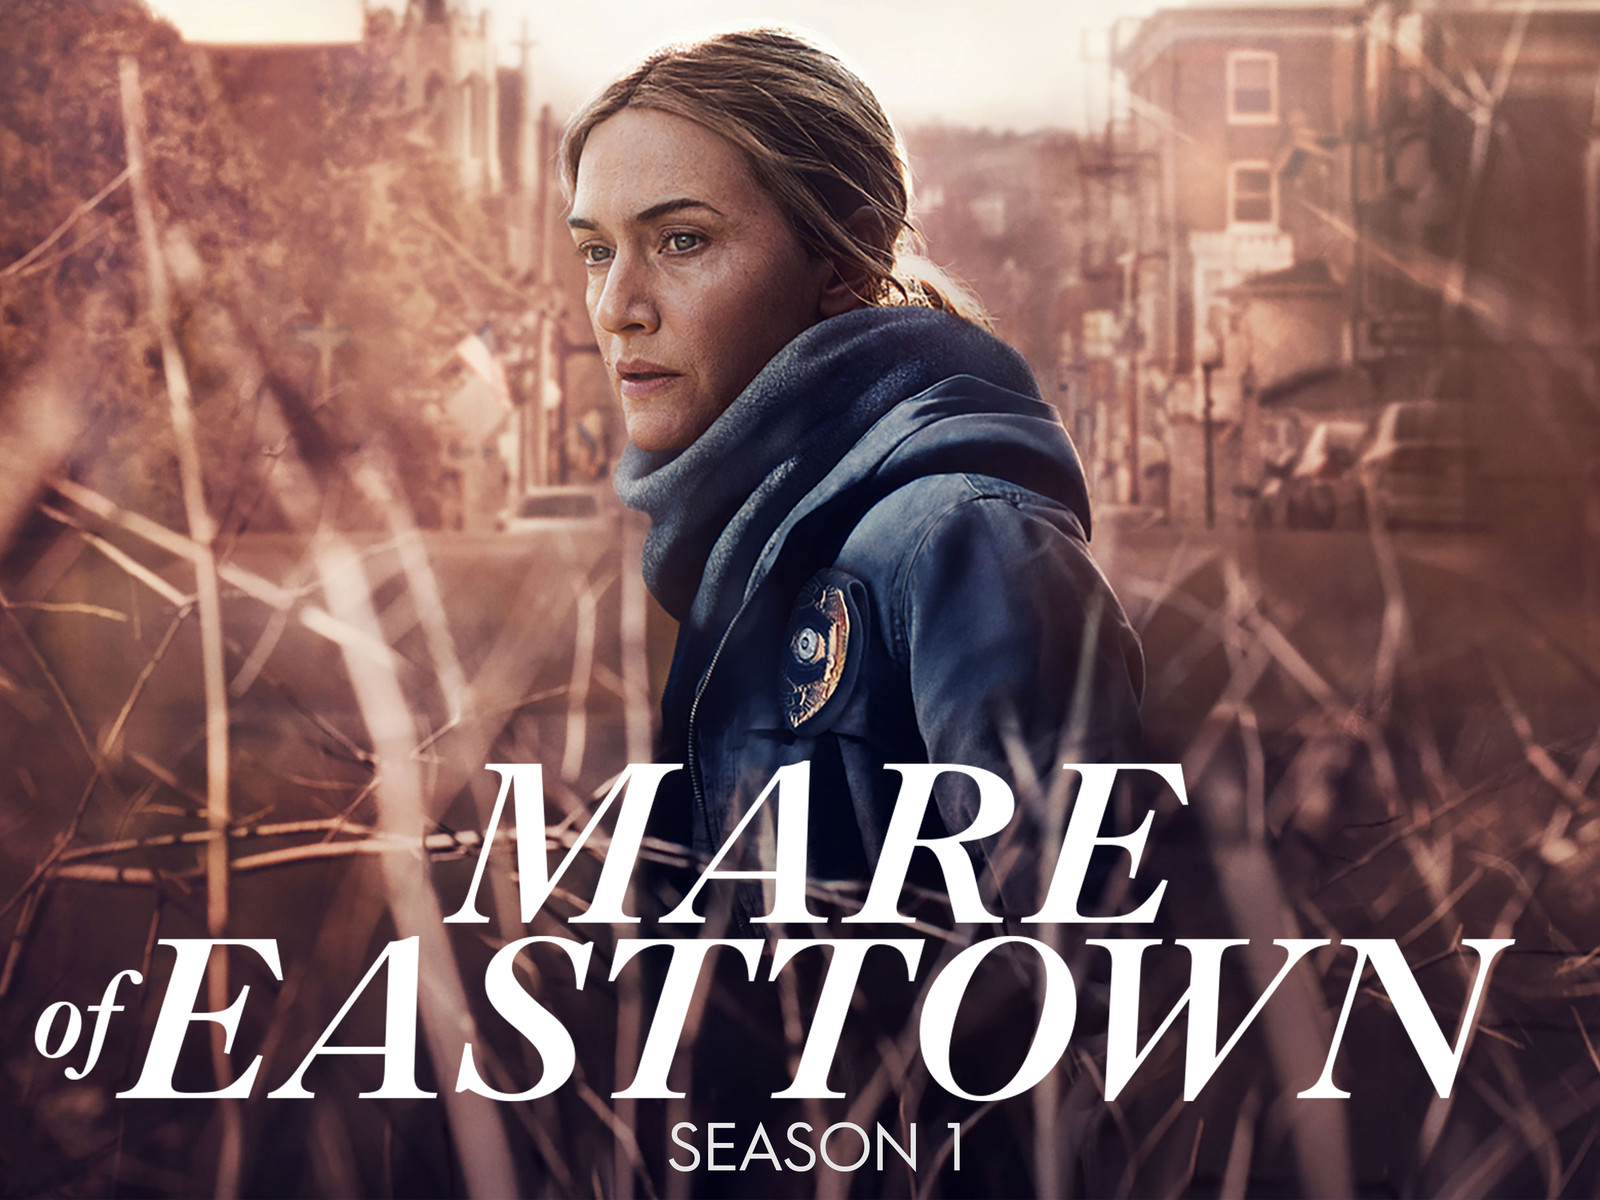 Hbo Mare Of Easttown Wallpapers